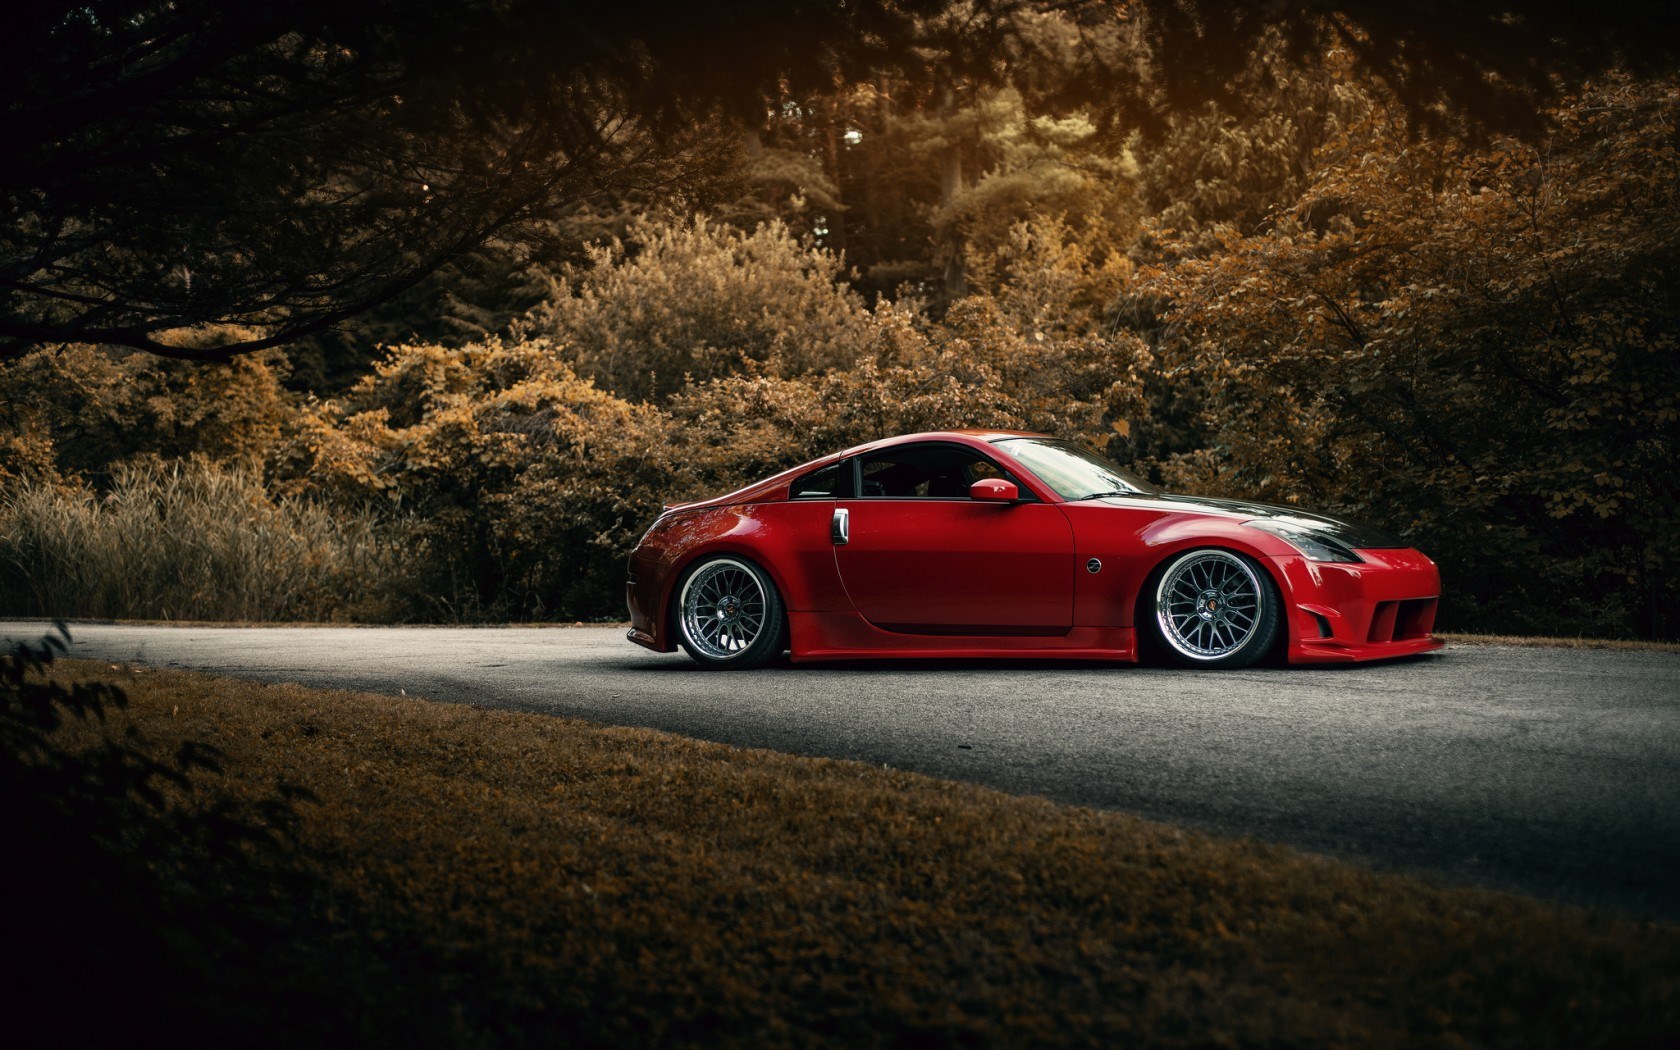 Nissan 350Z Wallpaper and Background Image 1680x1050 ID446042 1680x1050